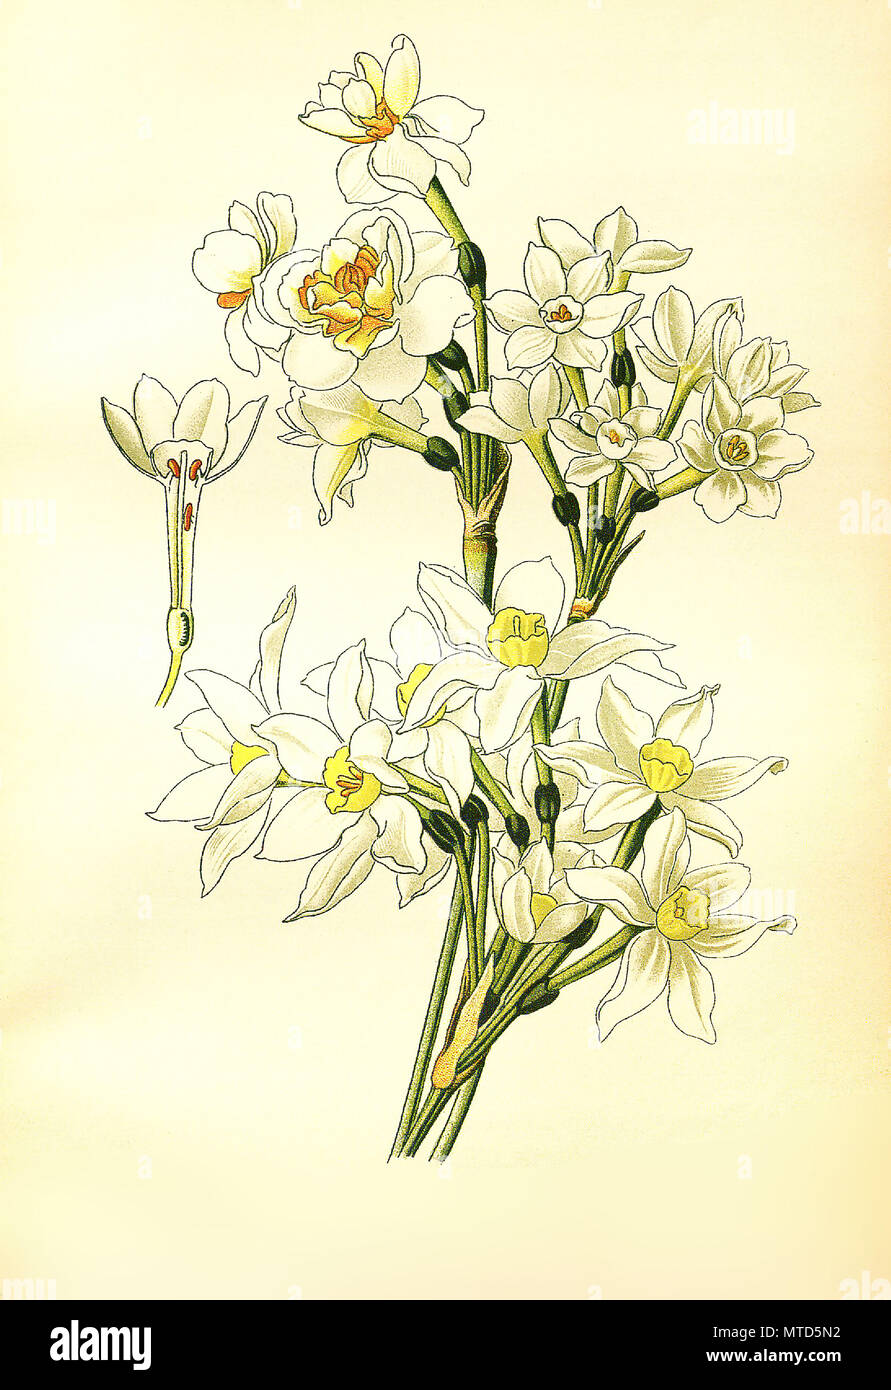 Narcissus tazetta, Polyanthus narcissus, paperwhite, bunch-flowered narcissus, bunch-flowered daffodil, Chinese sacred lily, cream narcissus, joss flower, polyanthus narcissus. StrauÃŸ-Narzisse, Bukett-Narzisse, MehrblÃ¼tige Narzisse oder Tazette, digital improved reproduction from a print of the 19th century Stock Photo